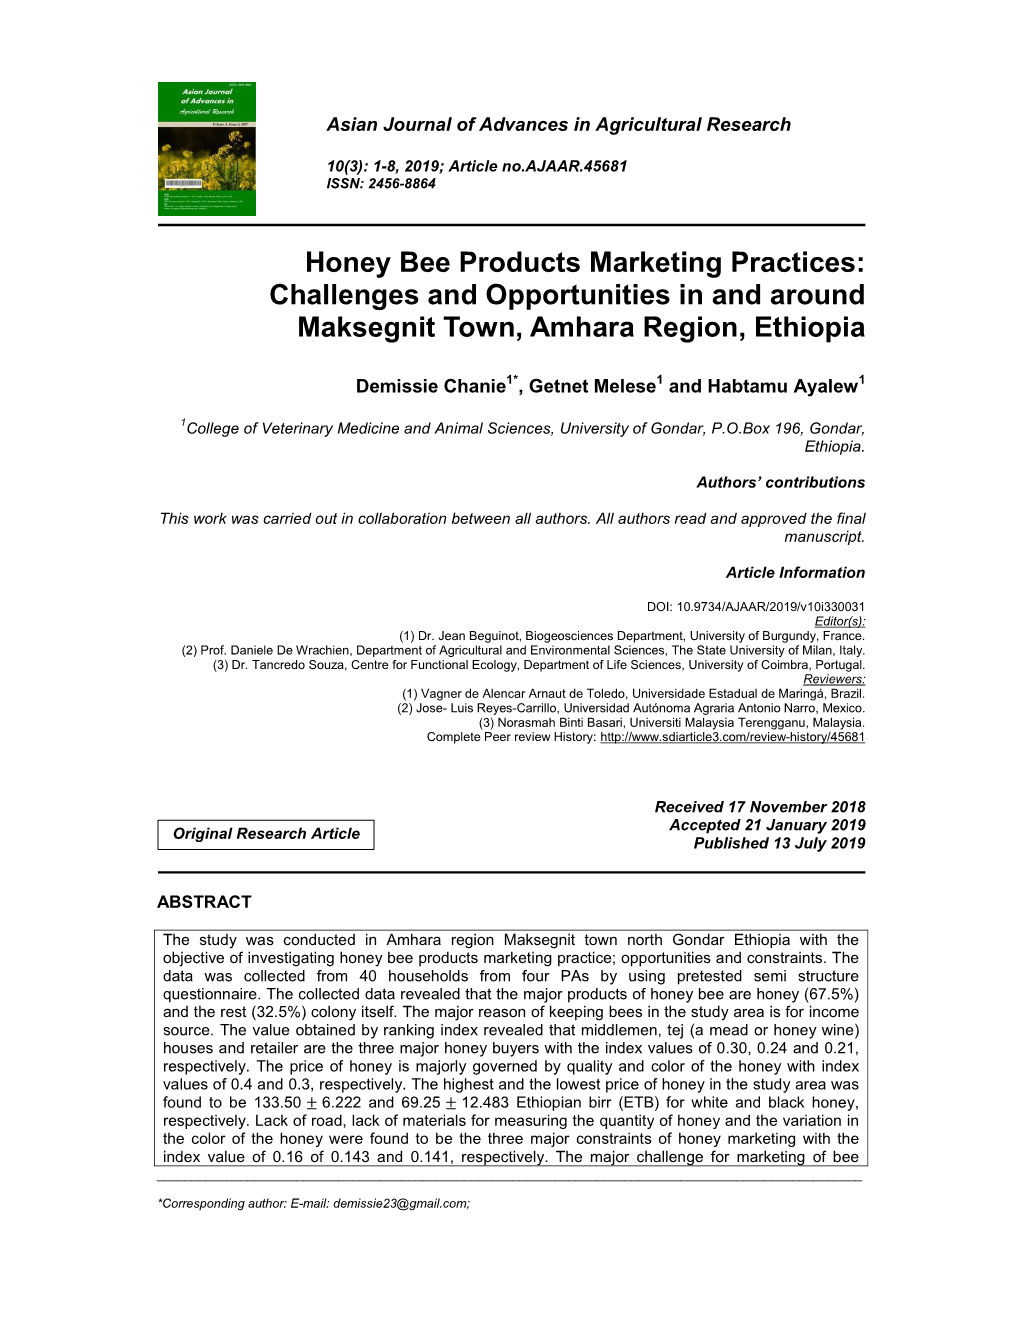 Challenges and Opportunities in and Around Maksegnit Town, Amhara Region, Ethiopia